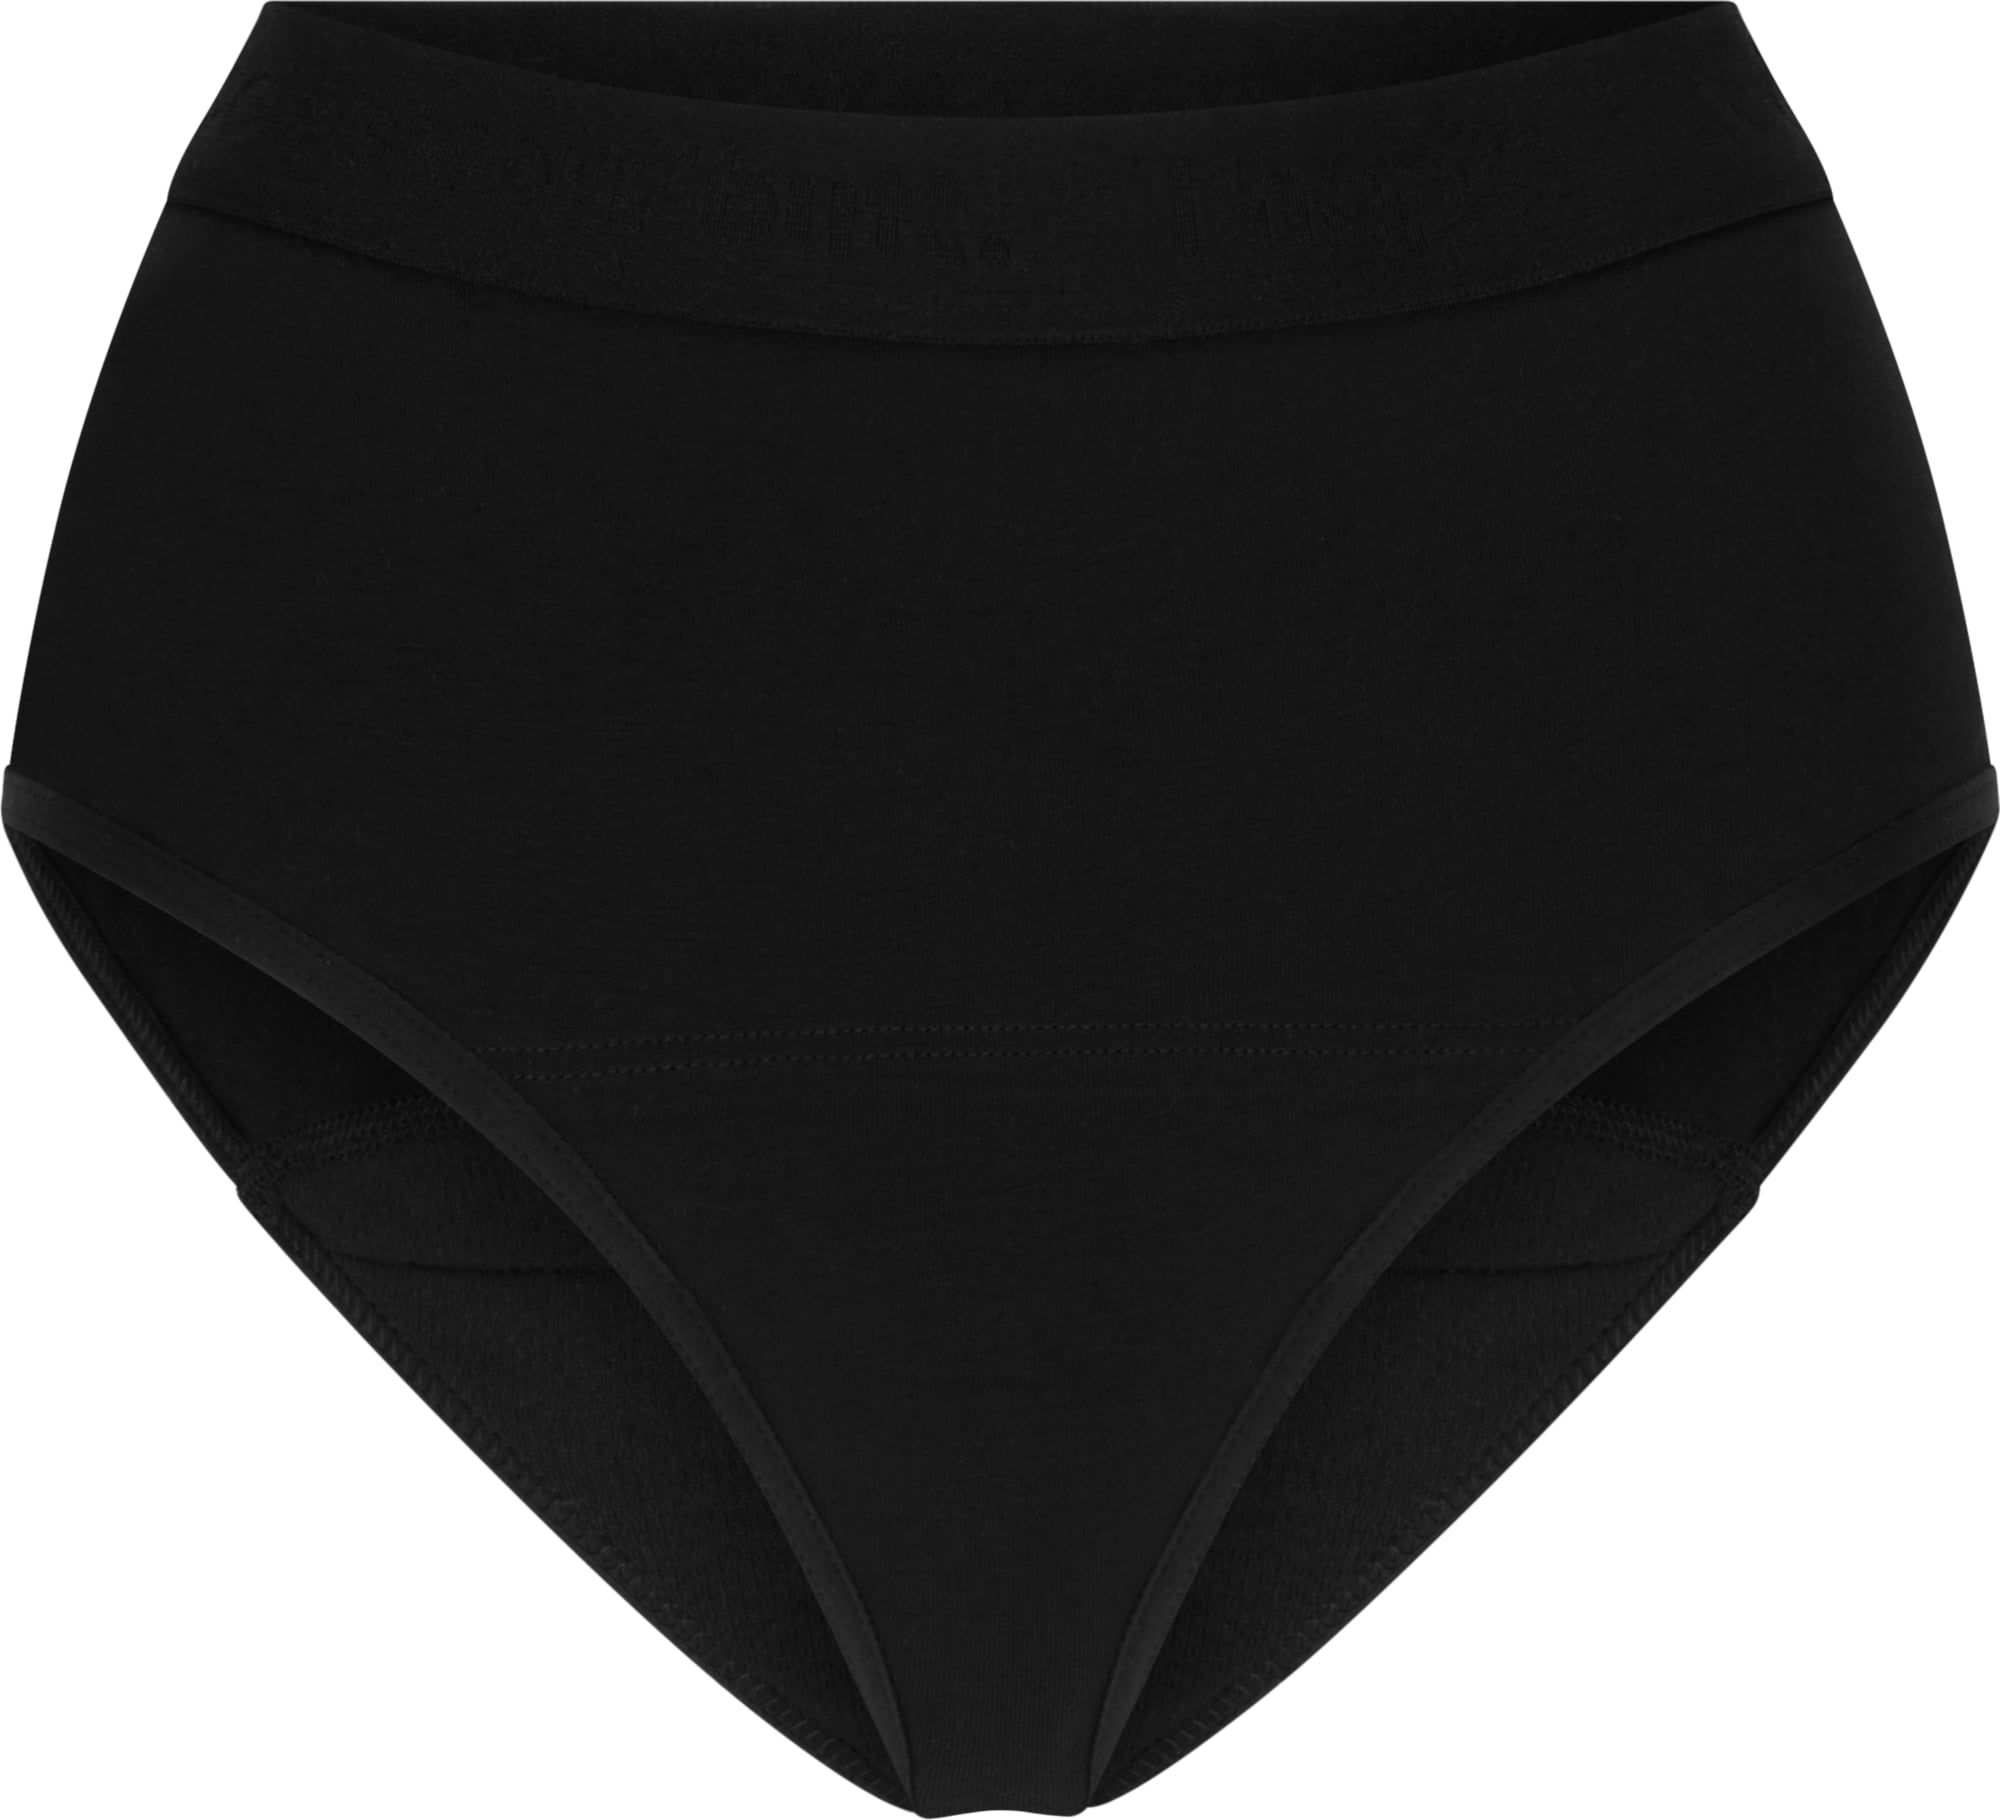 Charmo Womens Period Underwear Plus Size Panties High Waisted Leak